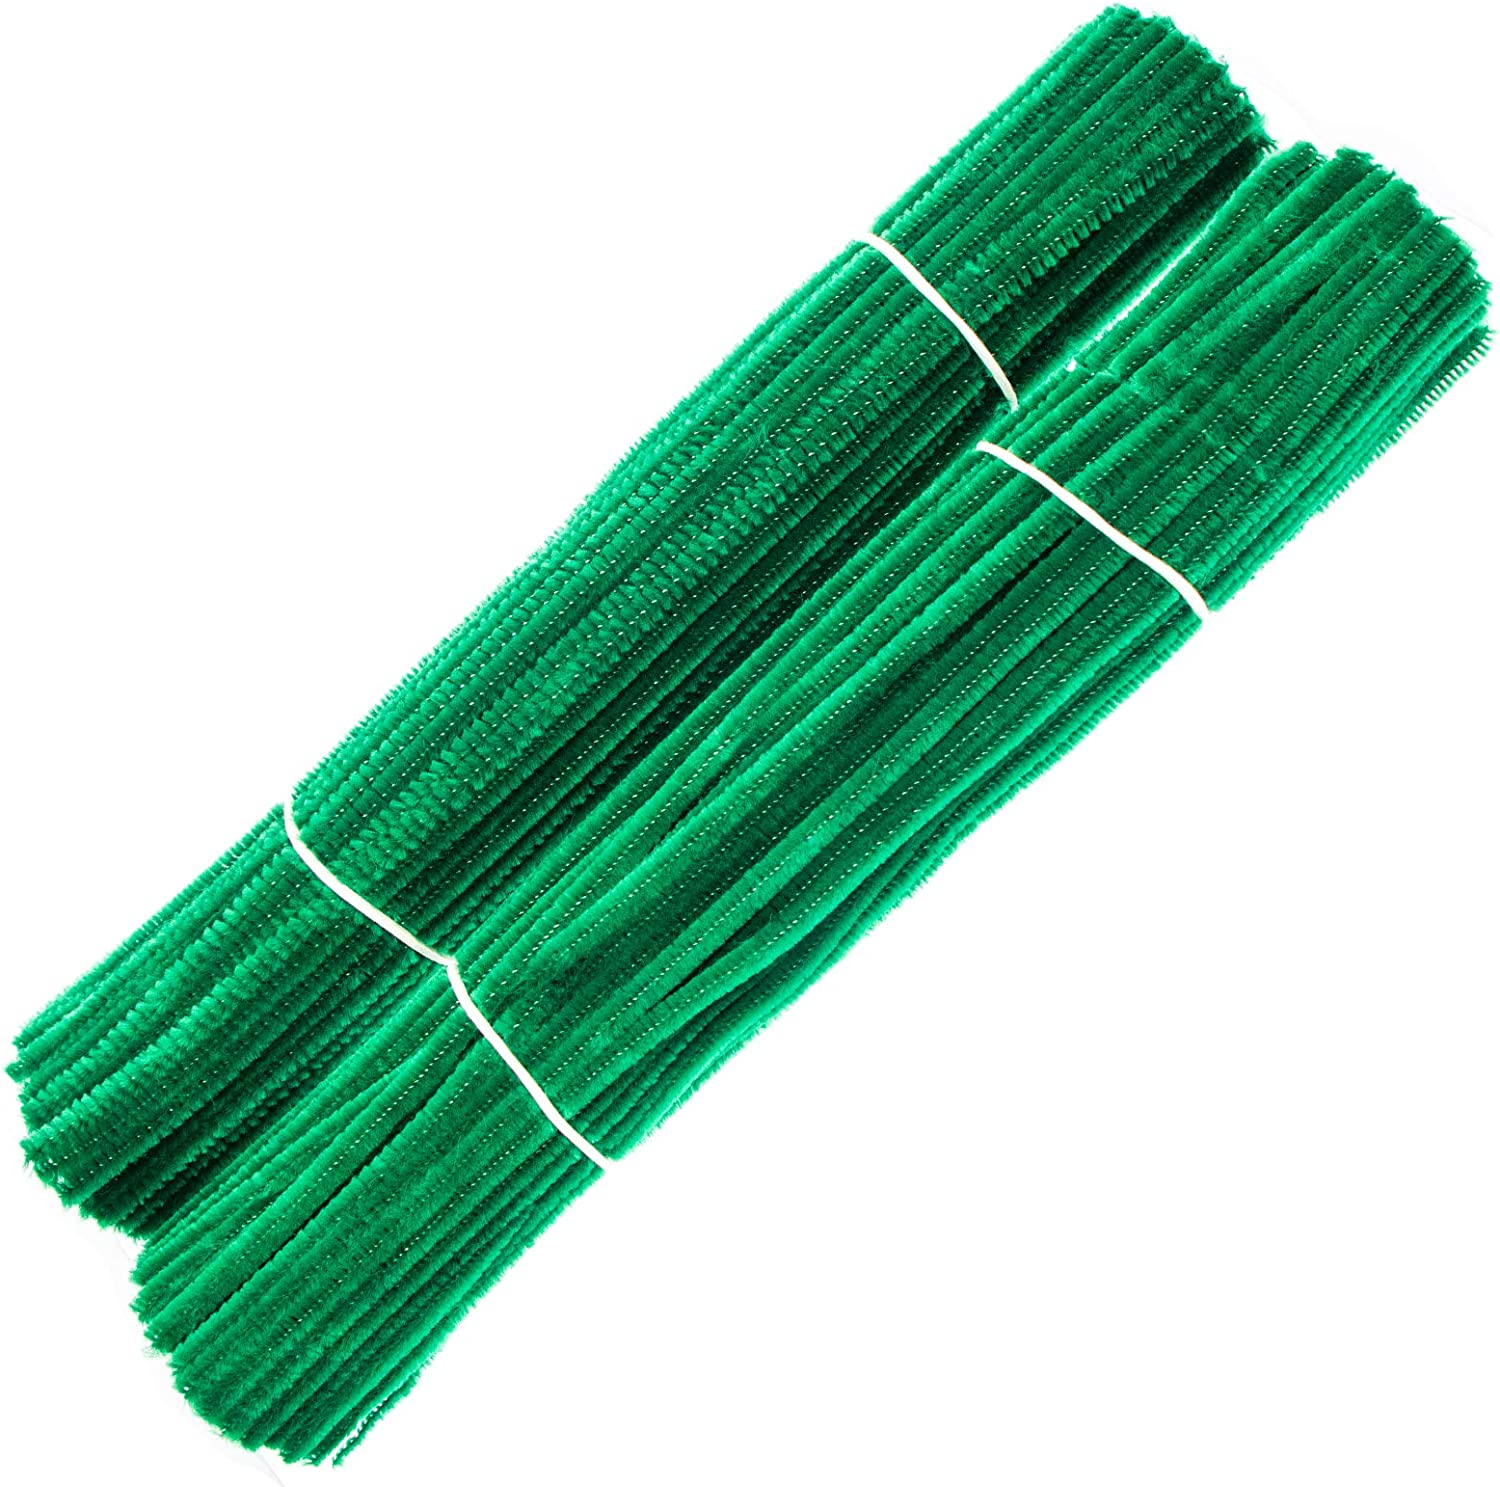 200 Pieces Pipe Cleaners Dark Green Chenille Stem for DIY Art